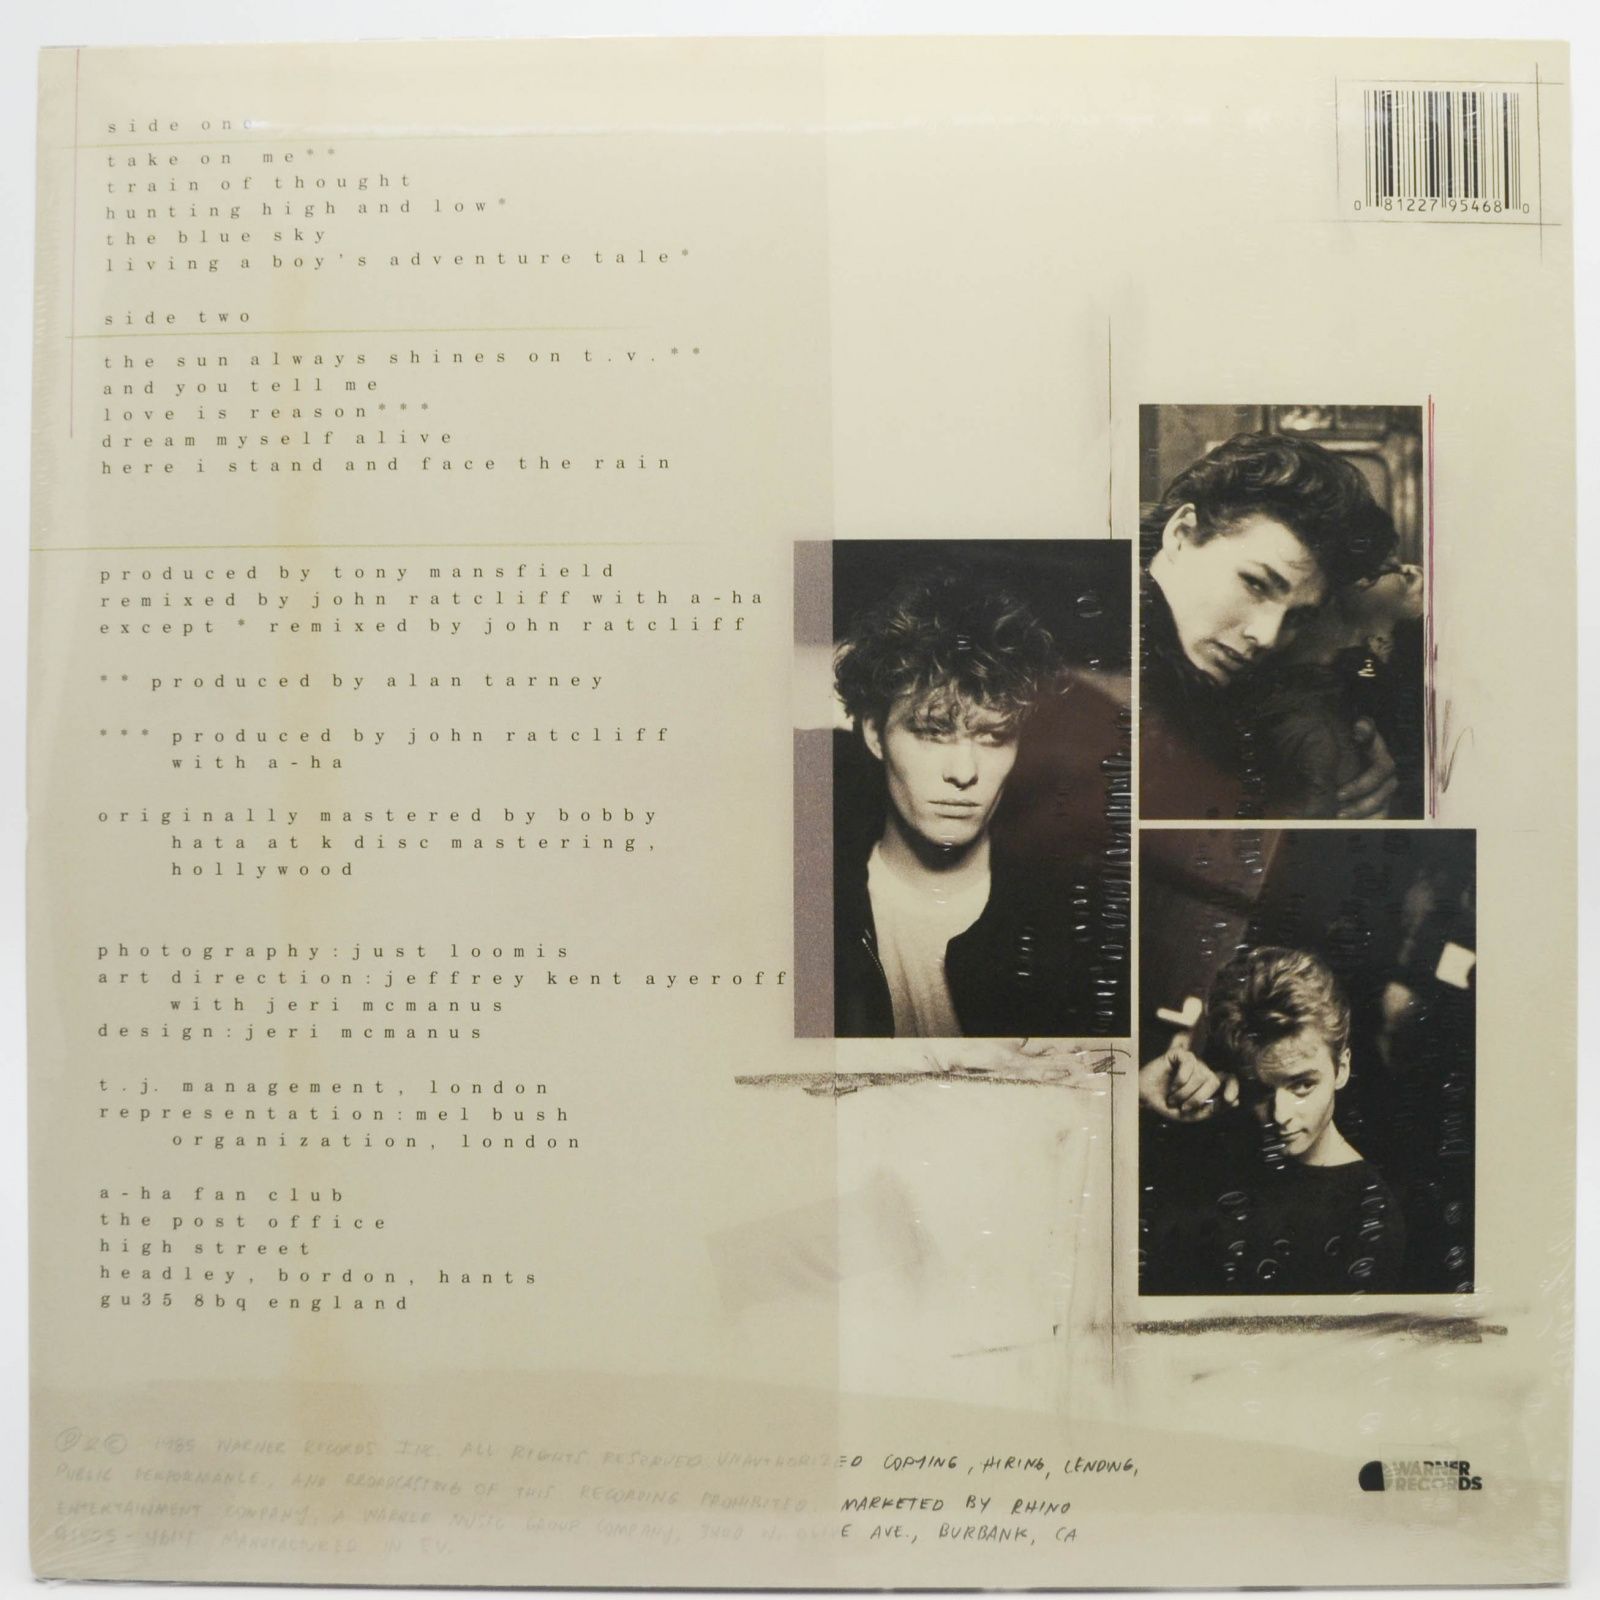 a-ha — Hunting High And Low, 1985